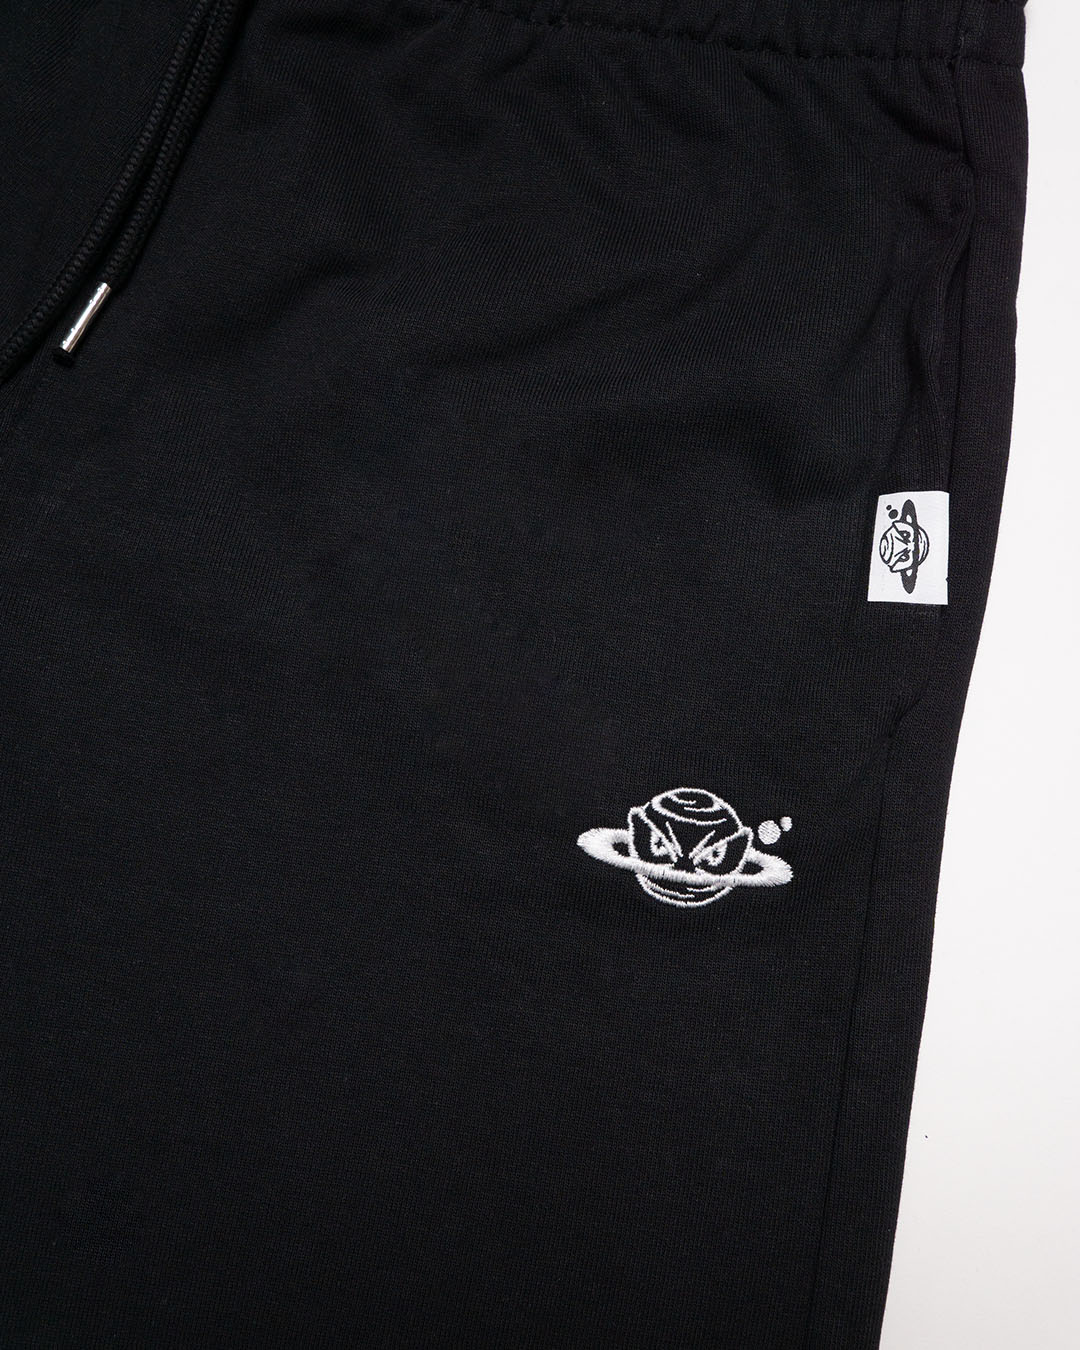 687 Embroidered Jogger Short